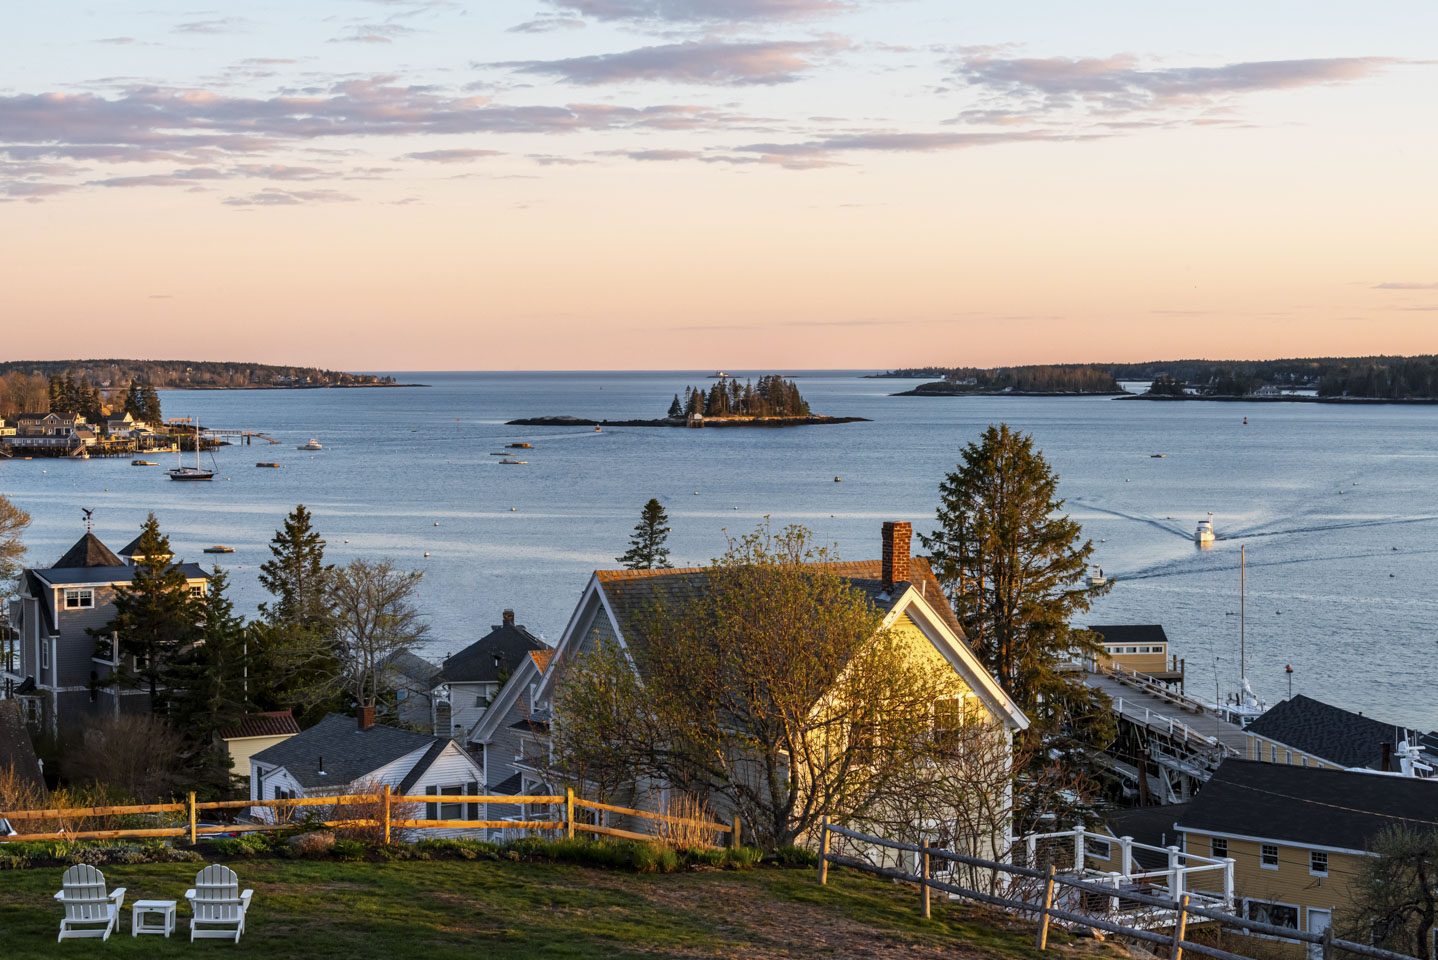 View of the harbor in Boothbay Harbor, as seen from Topside Inn